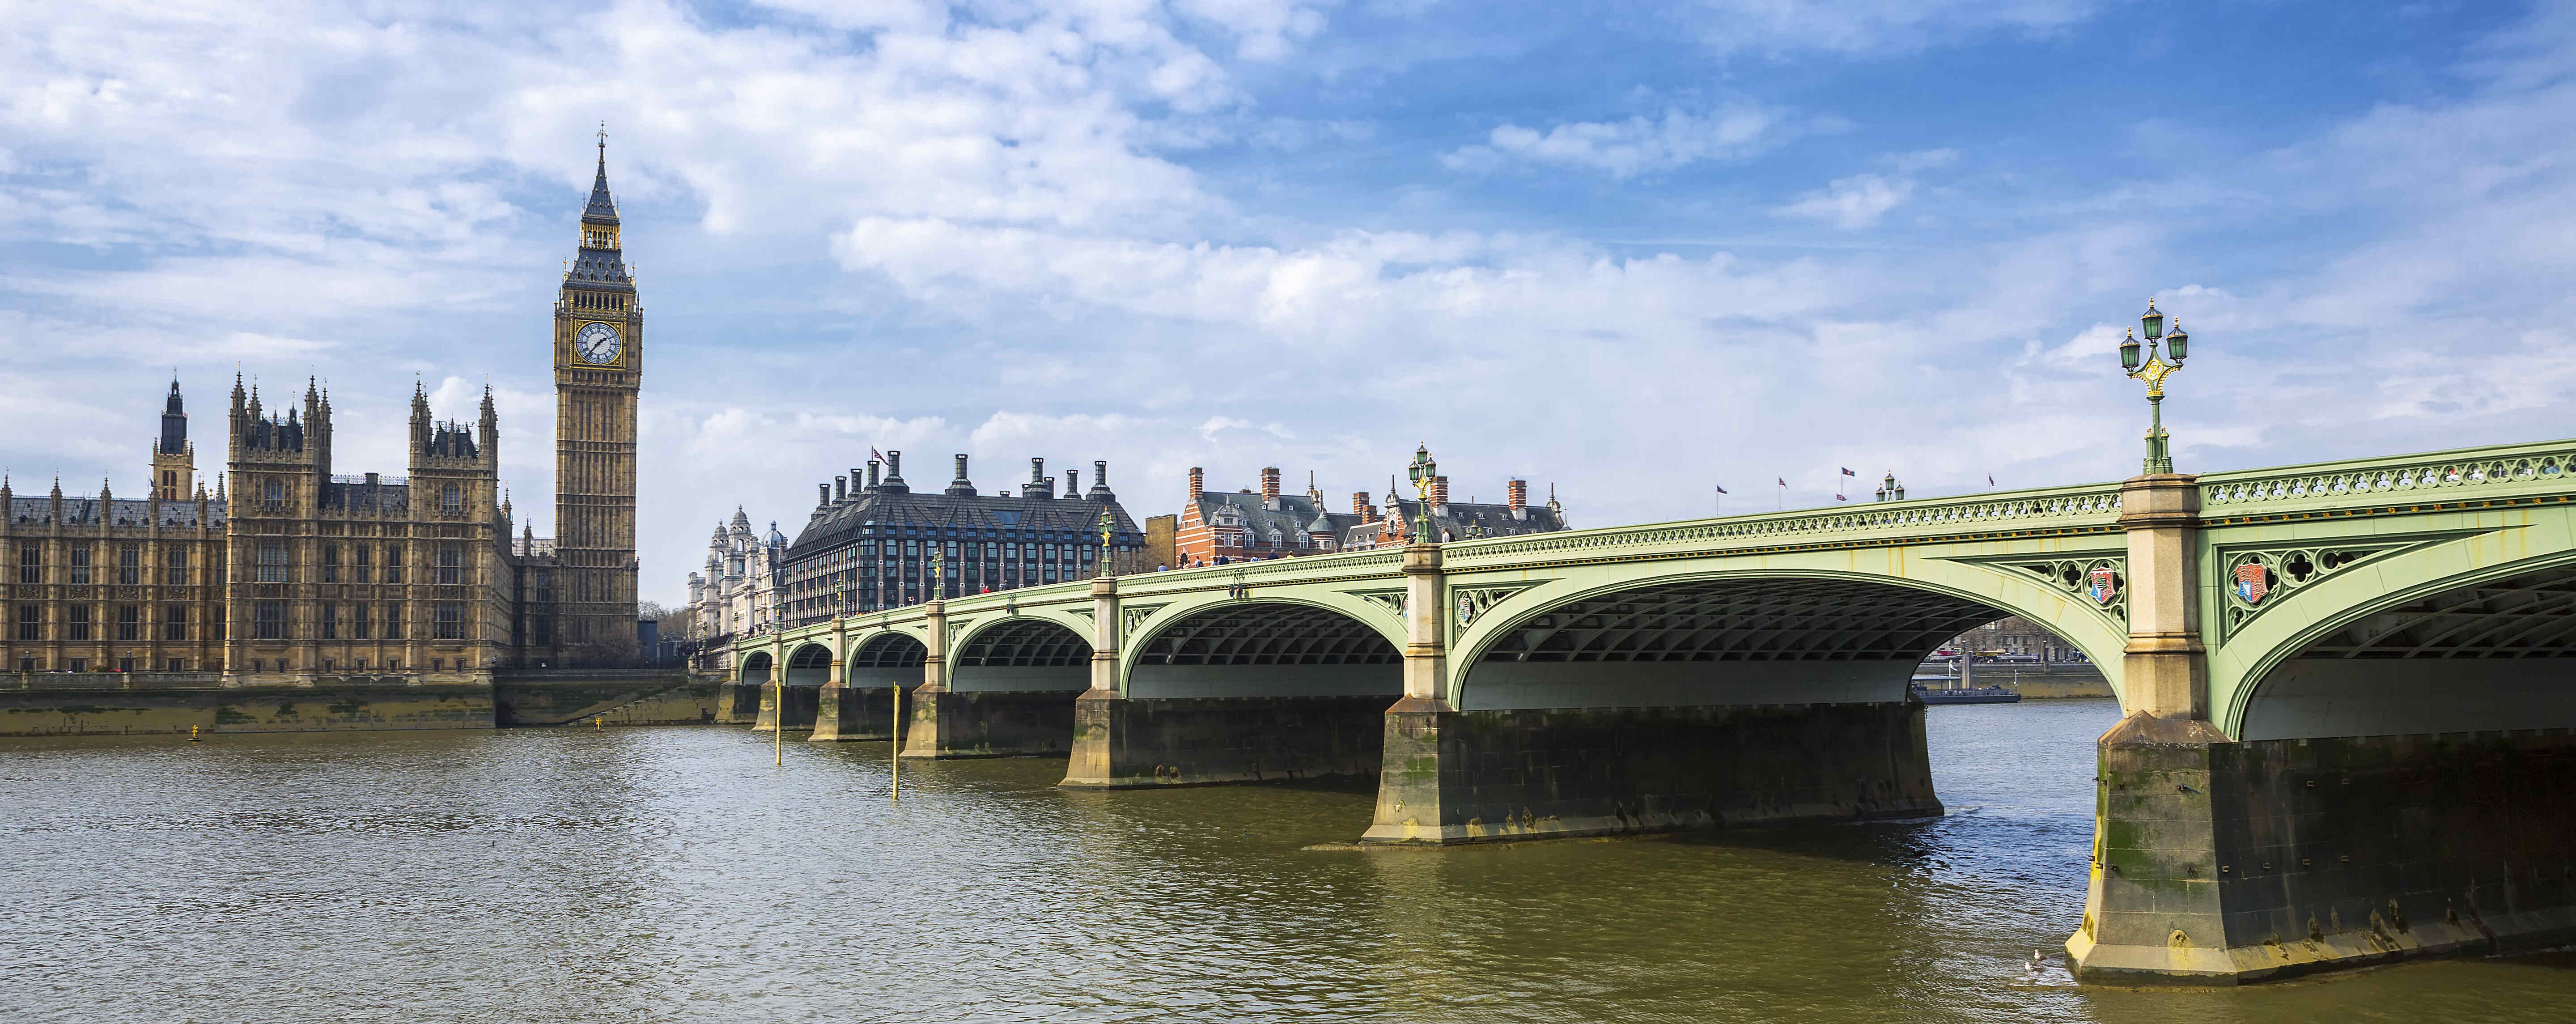 Panoramic photograph of Big Ben bridge on a sunny day in London.